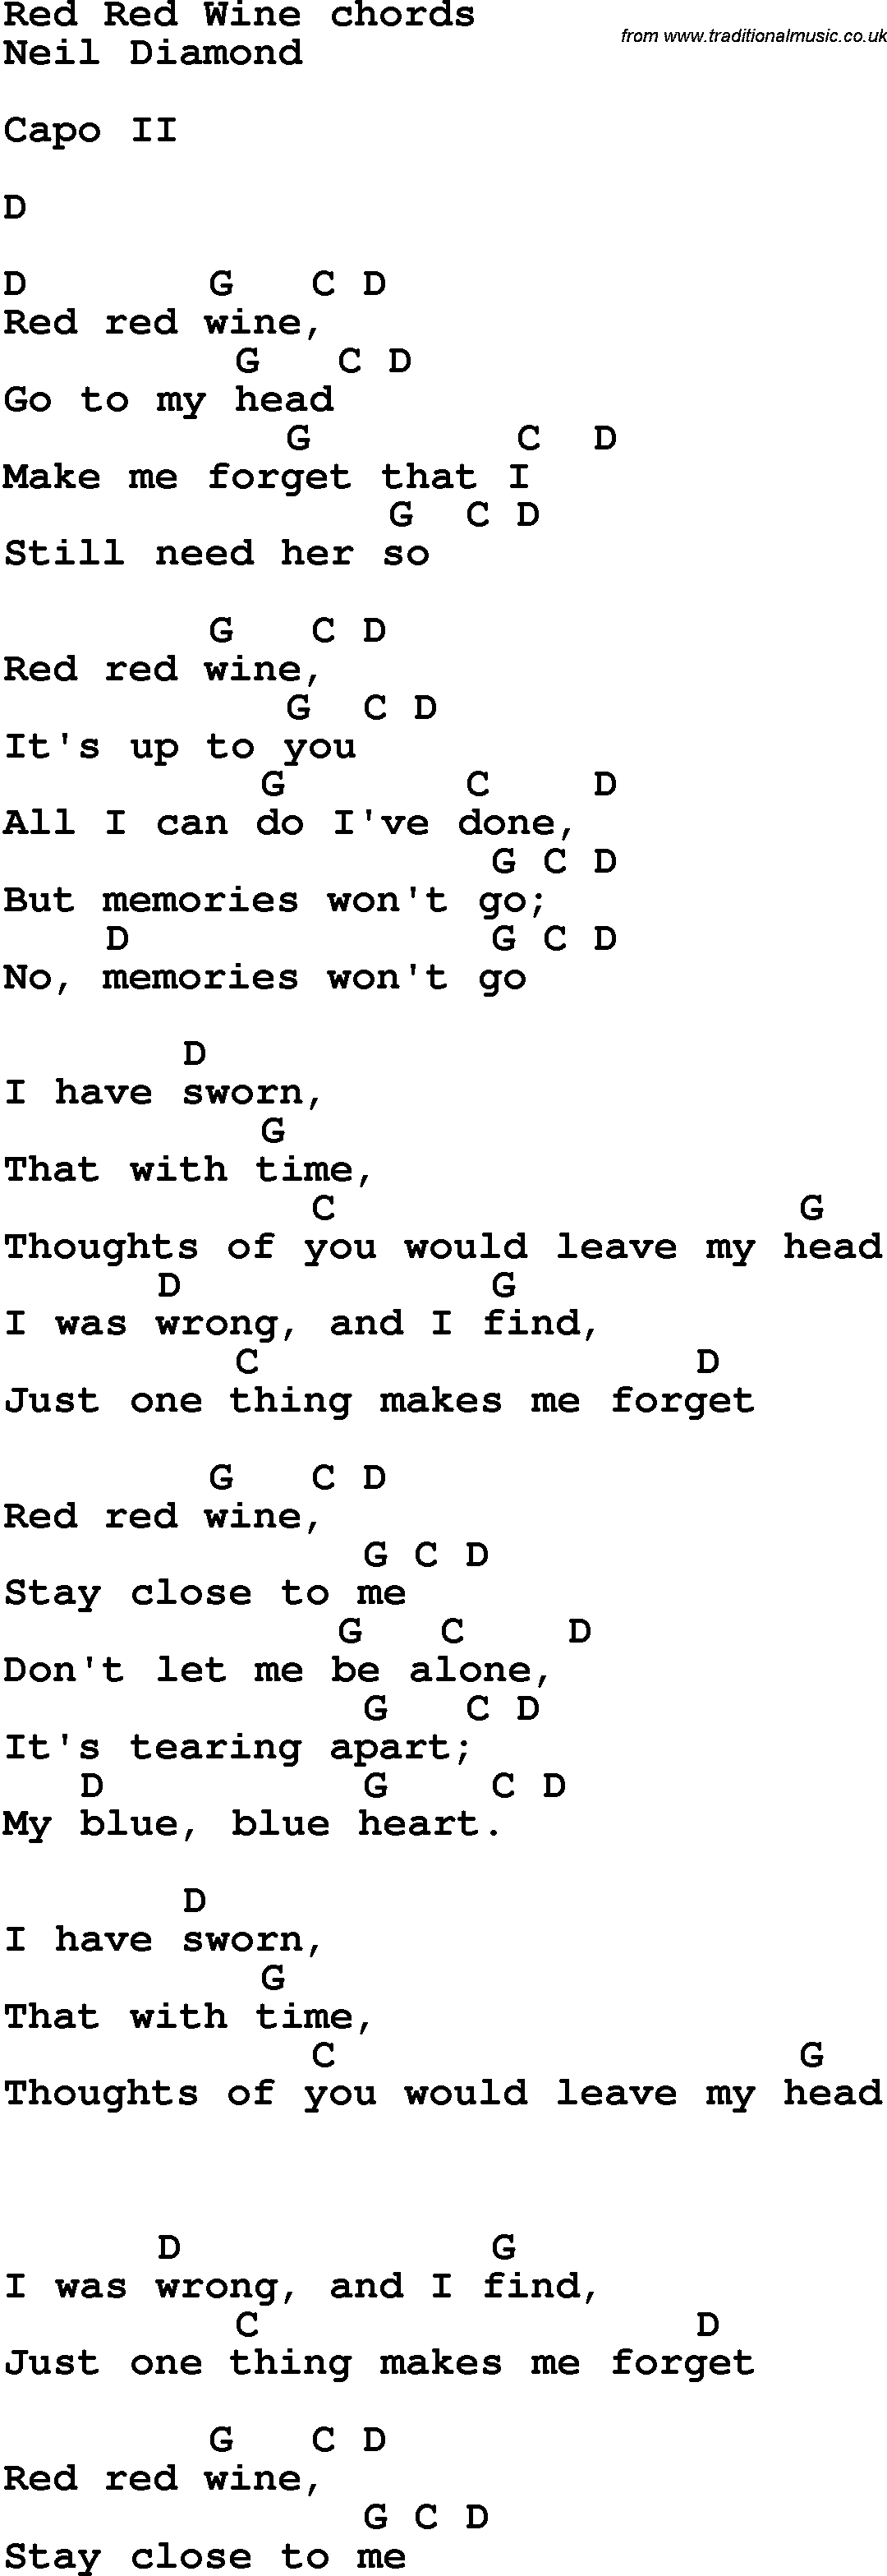 Song Lyrics with guitar chords for Red Red Wine